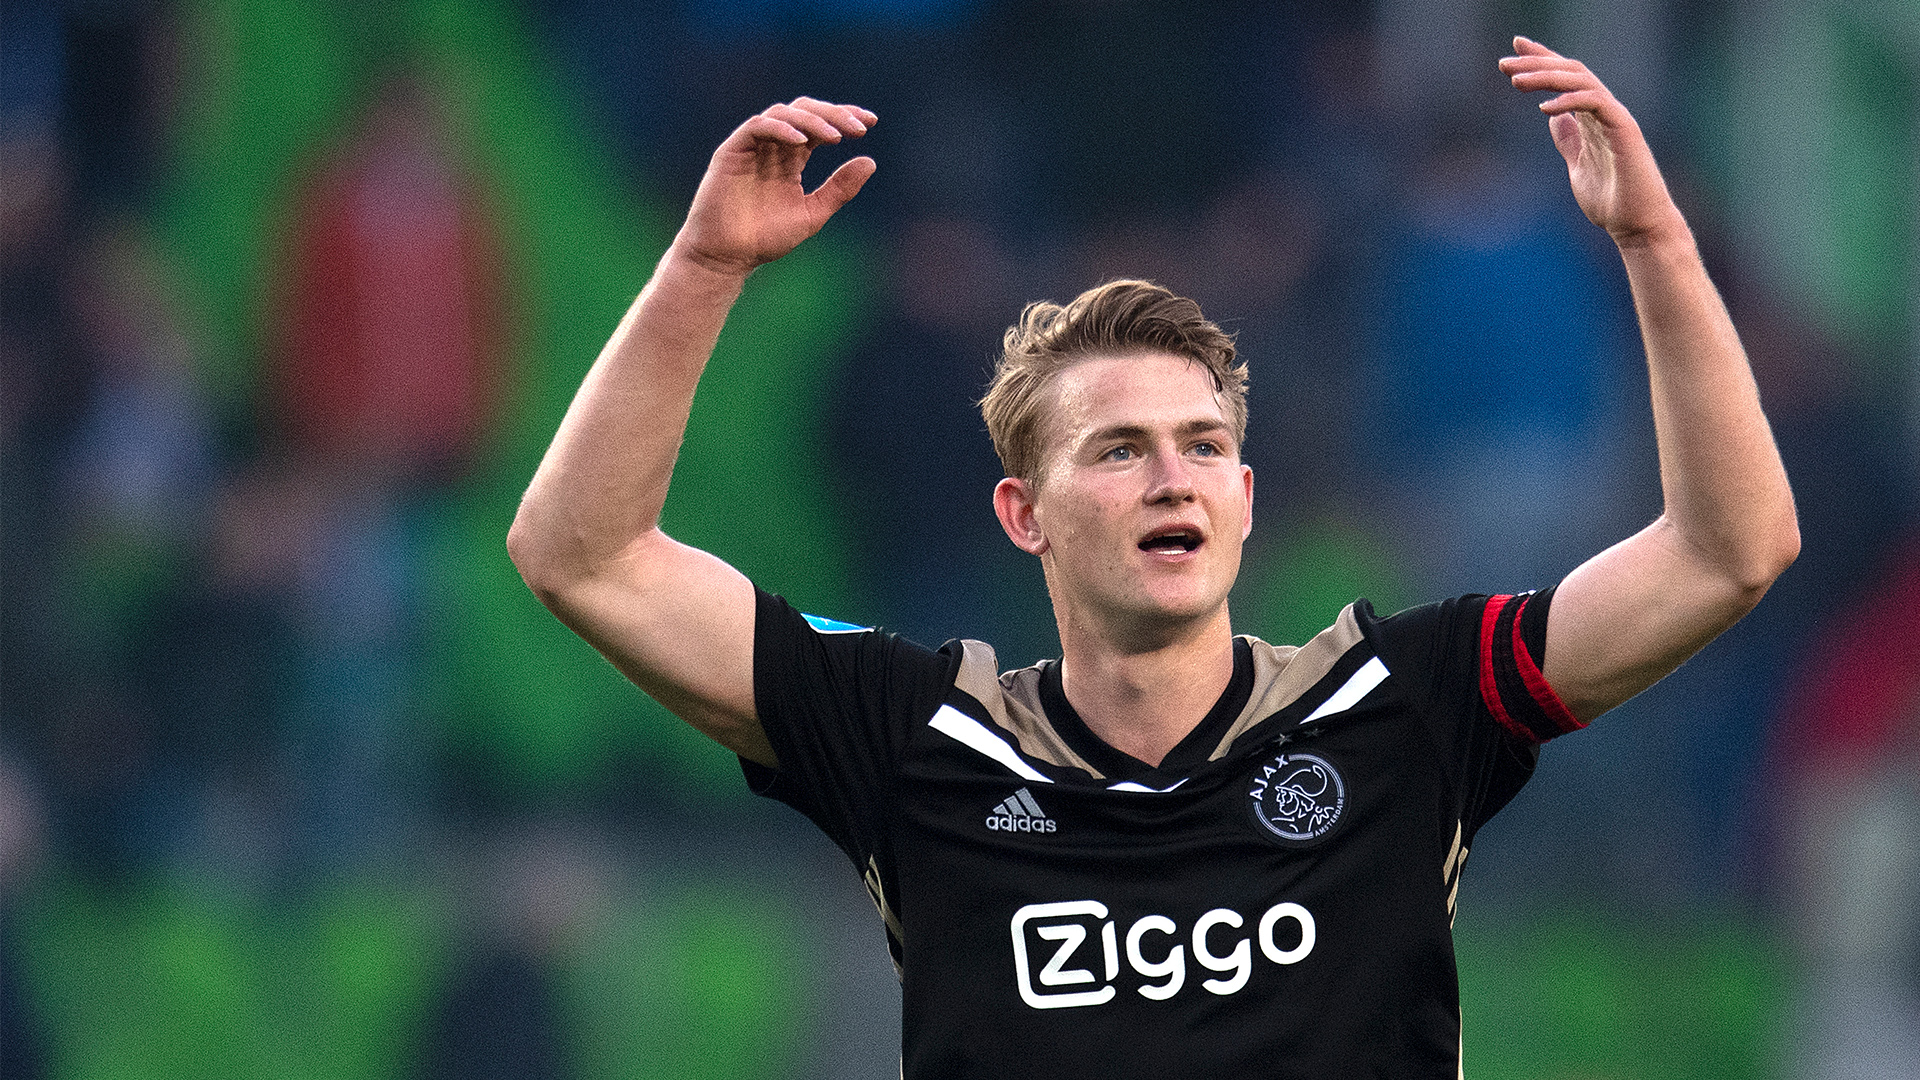 Catching up with De Ligt